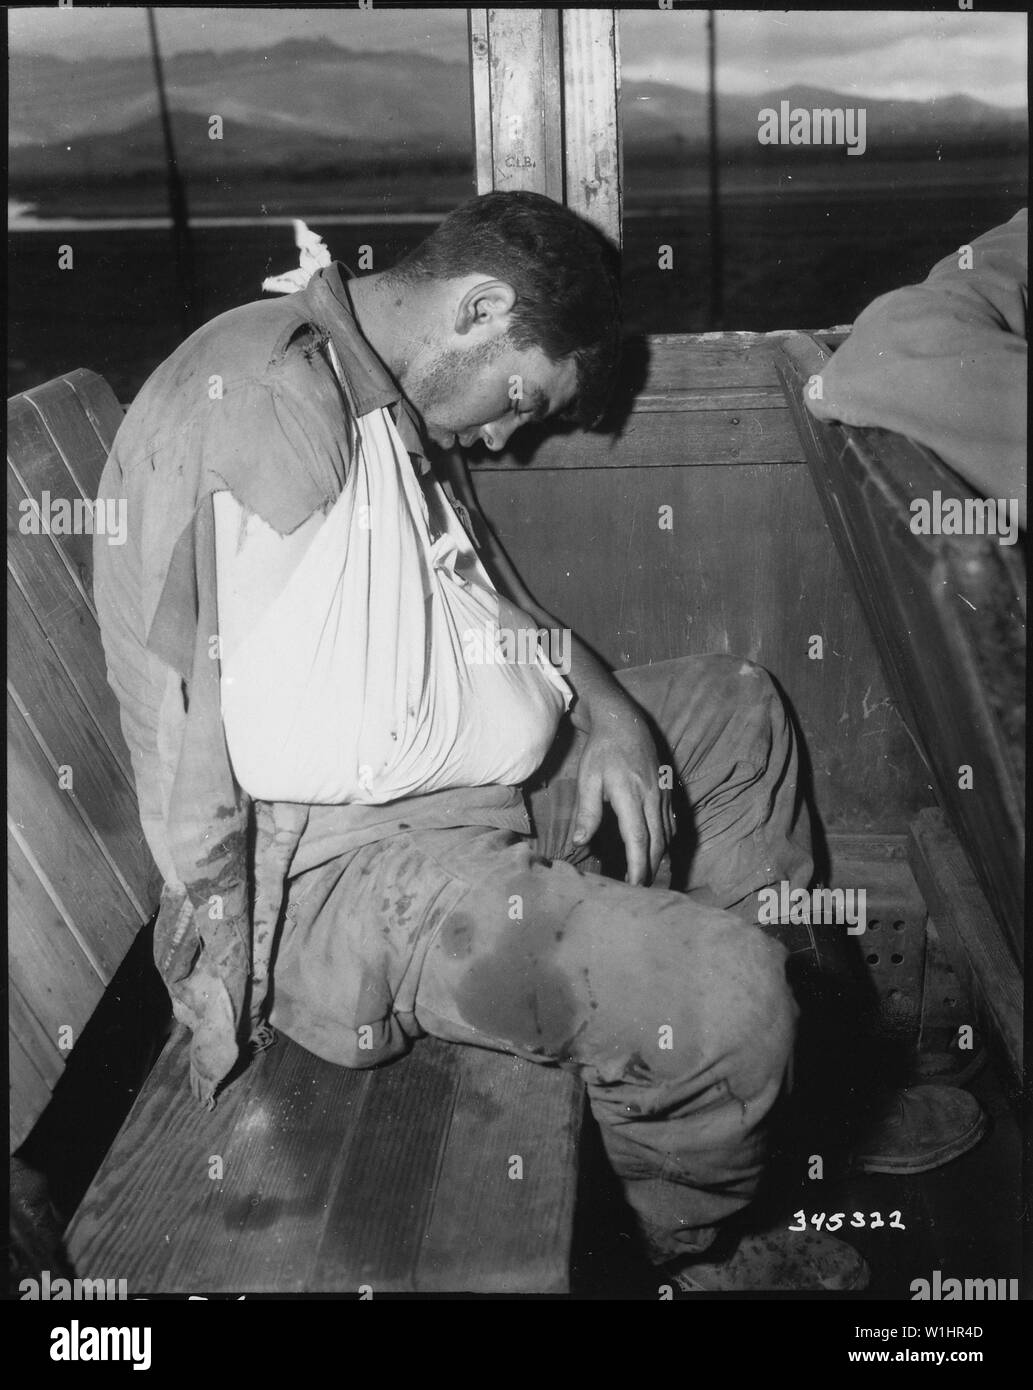 Private First Class, Orvin L. Morris, 27th Regiment, takes a much deserved rest during his evacuation to Pusan, Korea, on a hospital train. He was wounded by enemy mortar fire on front lines.; General notes:  Use War and Conflict Number 1454 when ordering a reproduction or requesting information about this image. Stock Photo